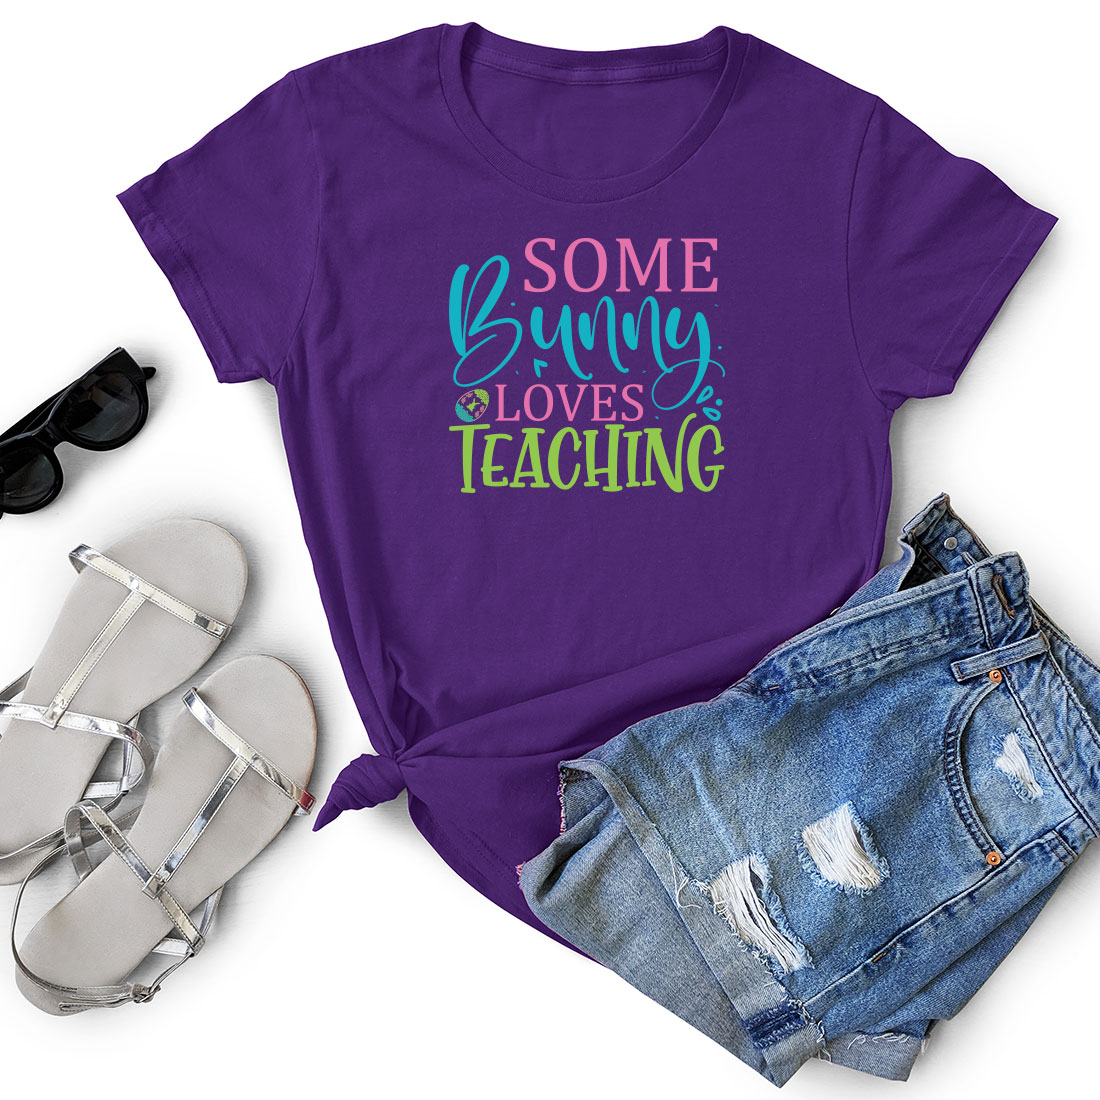 T - shirt that says some bunny loves teaching next to a pair of shorts.